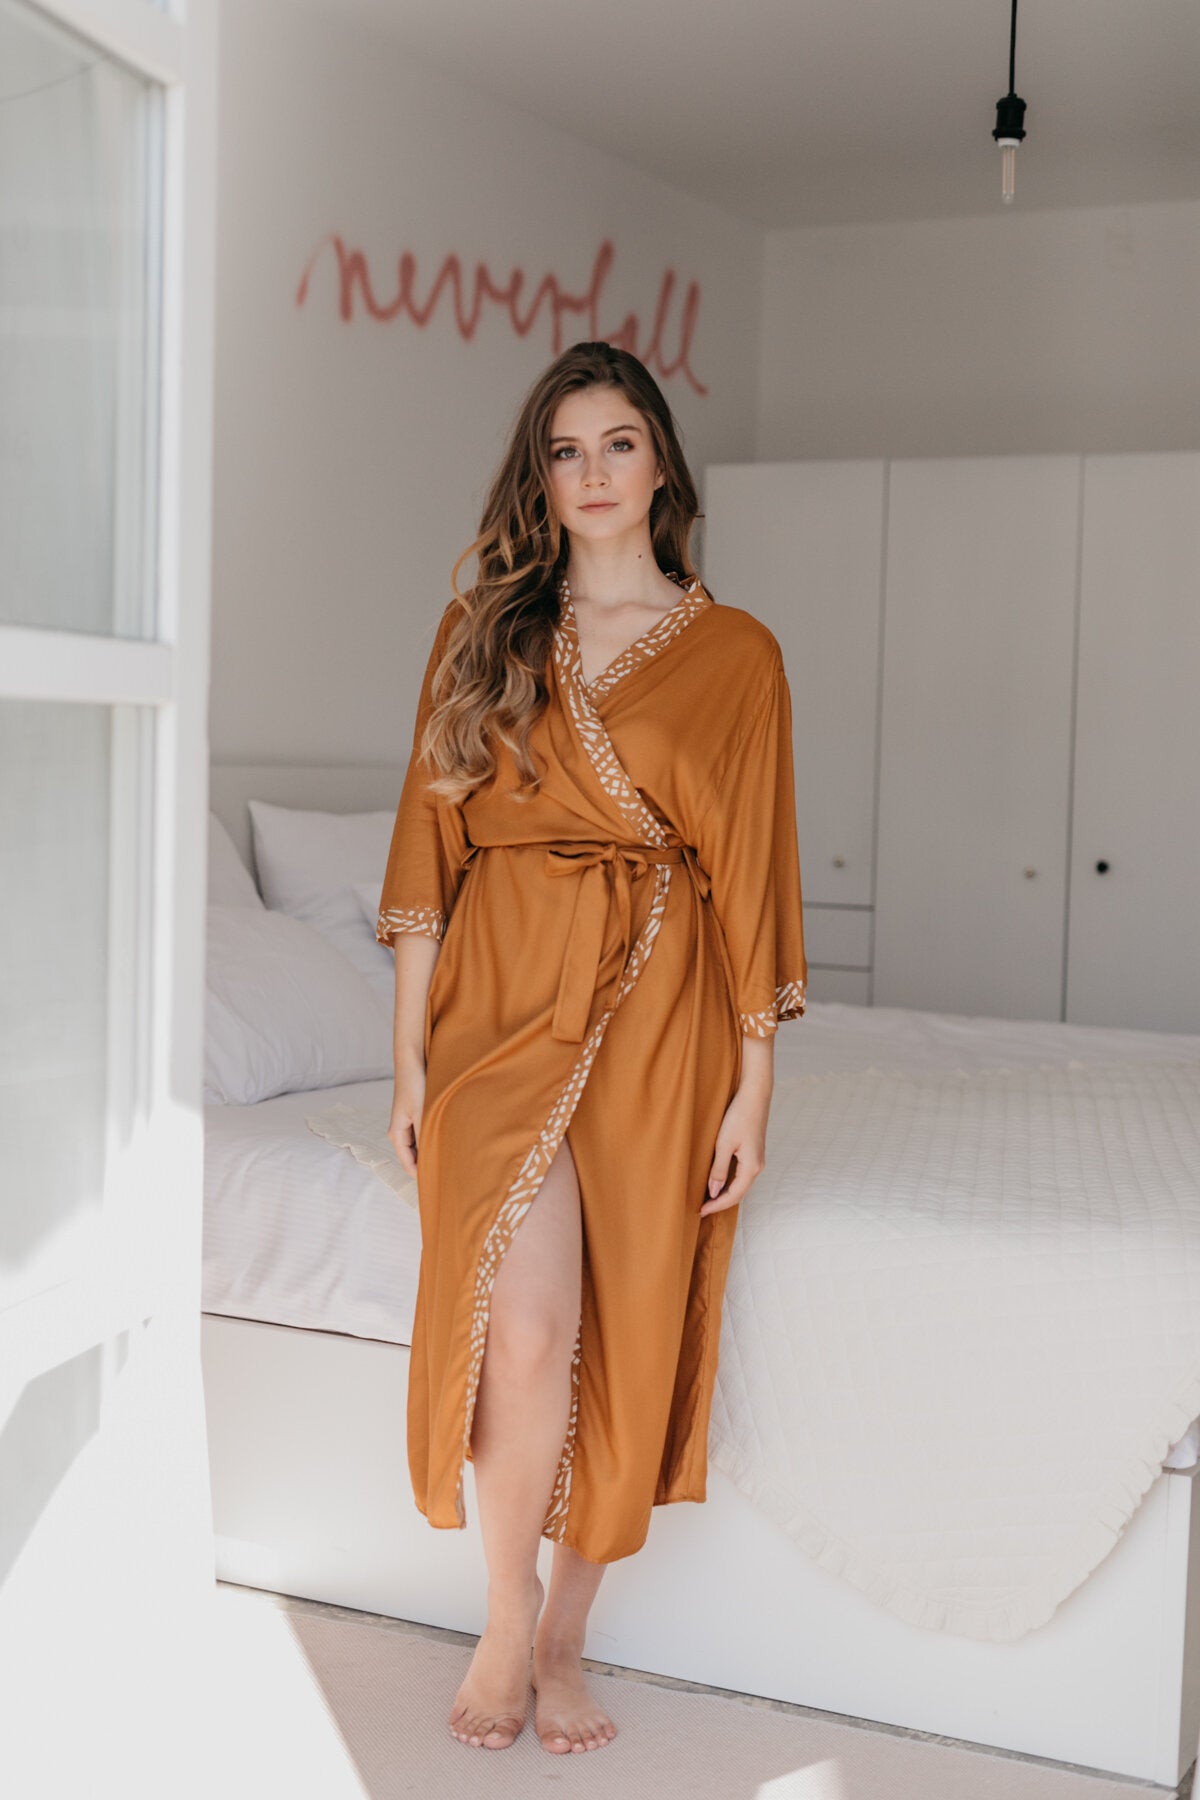 Load image into Gallery viewer, Tan robe with floral tan trim
